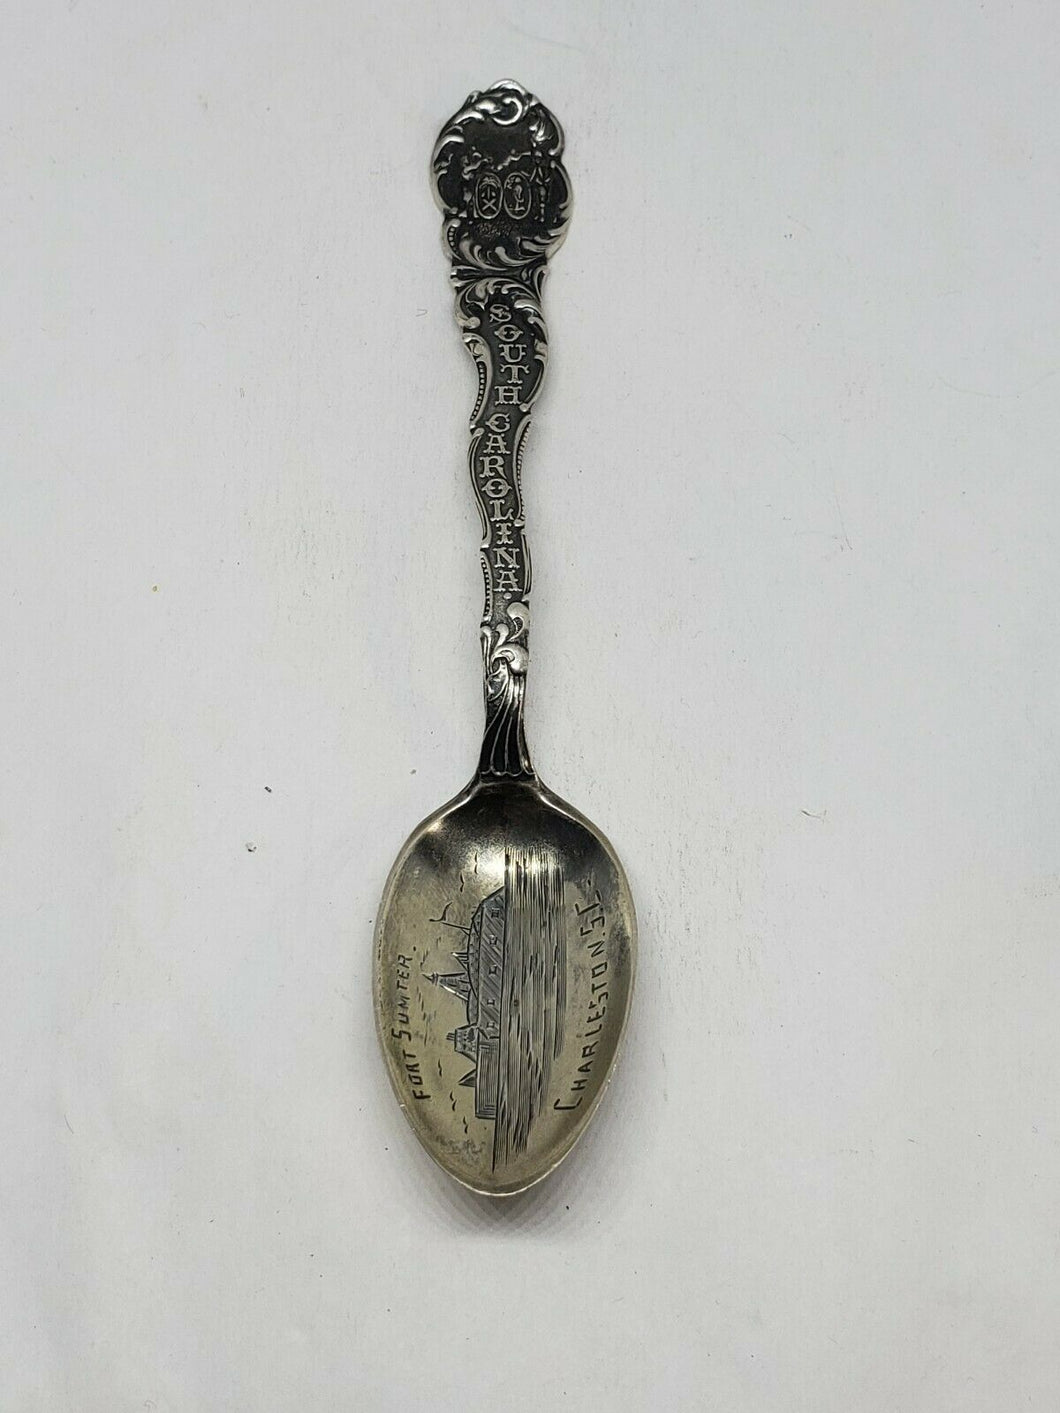 Vintage Sterling Silver Fort Sumpter Hand Etched South Carolina Souvenir Spoon